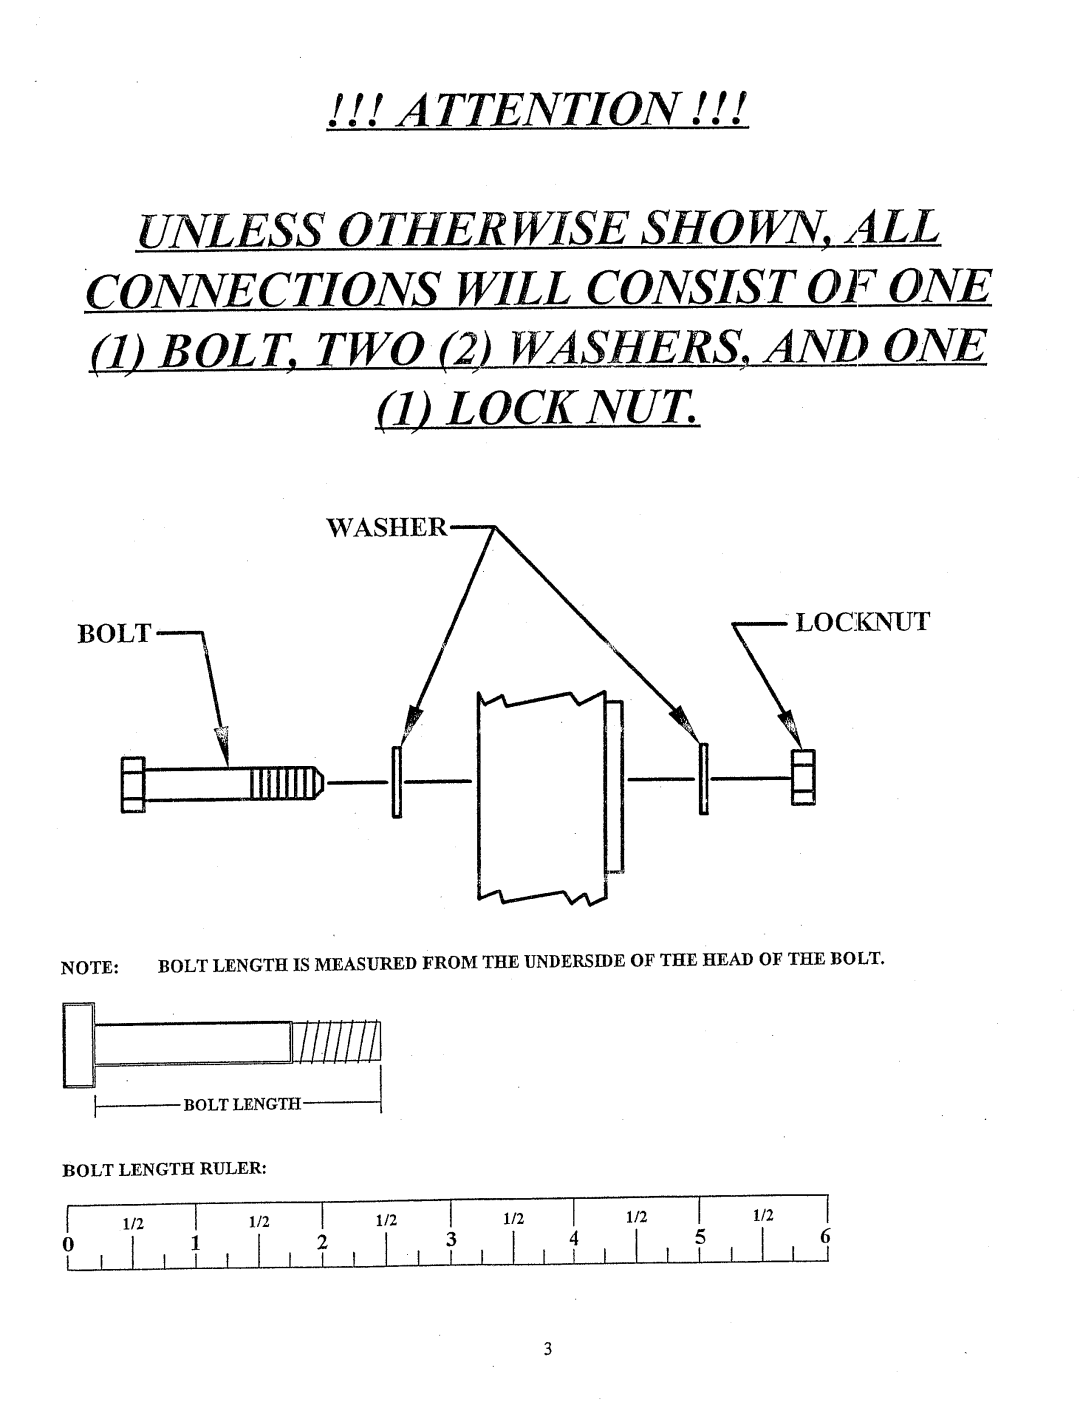 ParaBody 425 ii/i/I, UNL ESS 0 THER WISE SHO WN, ALL, Connections Will Consist Of One, Bolt, Two C Washers, Locknut, Cknut 